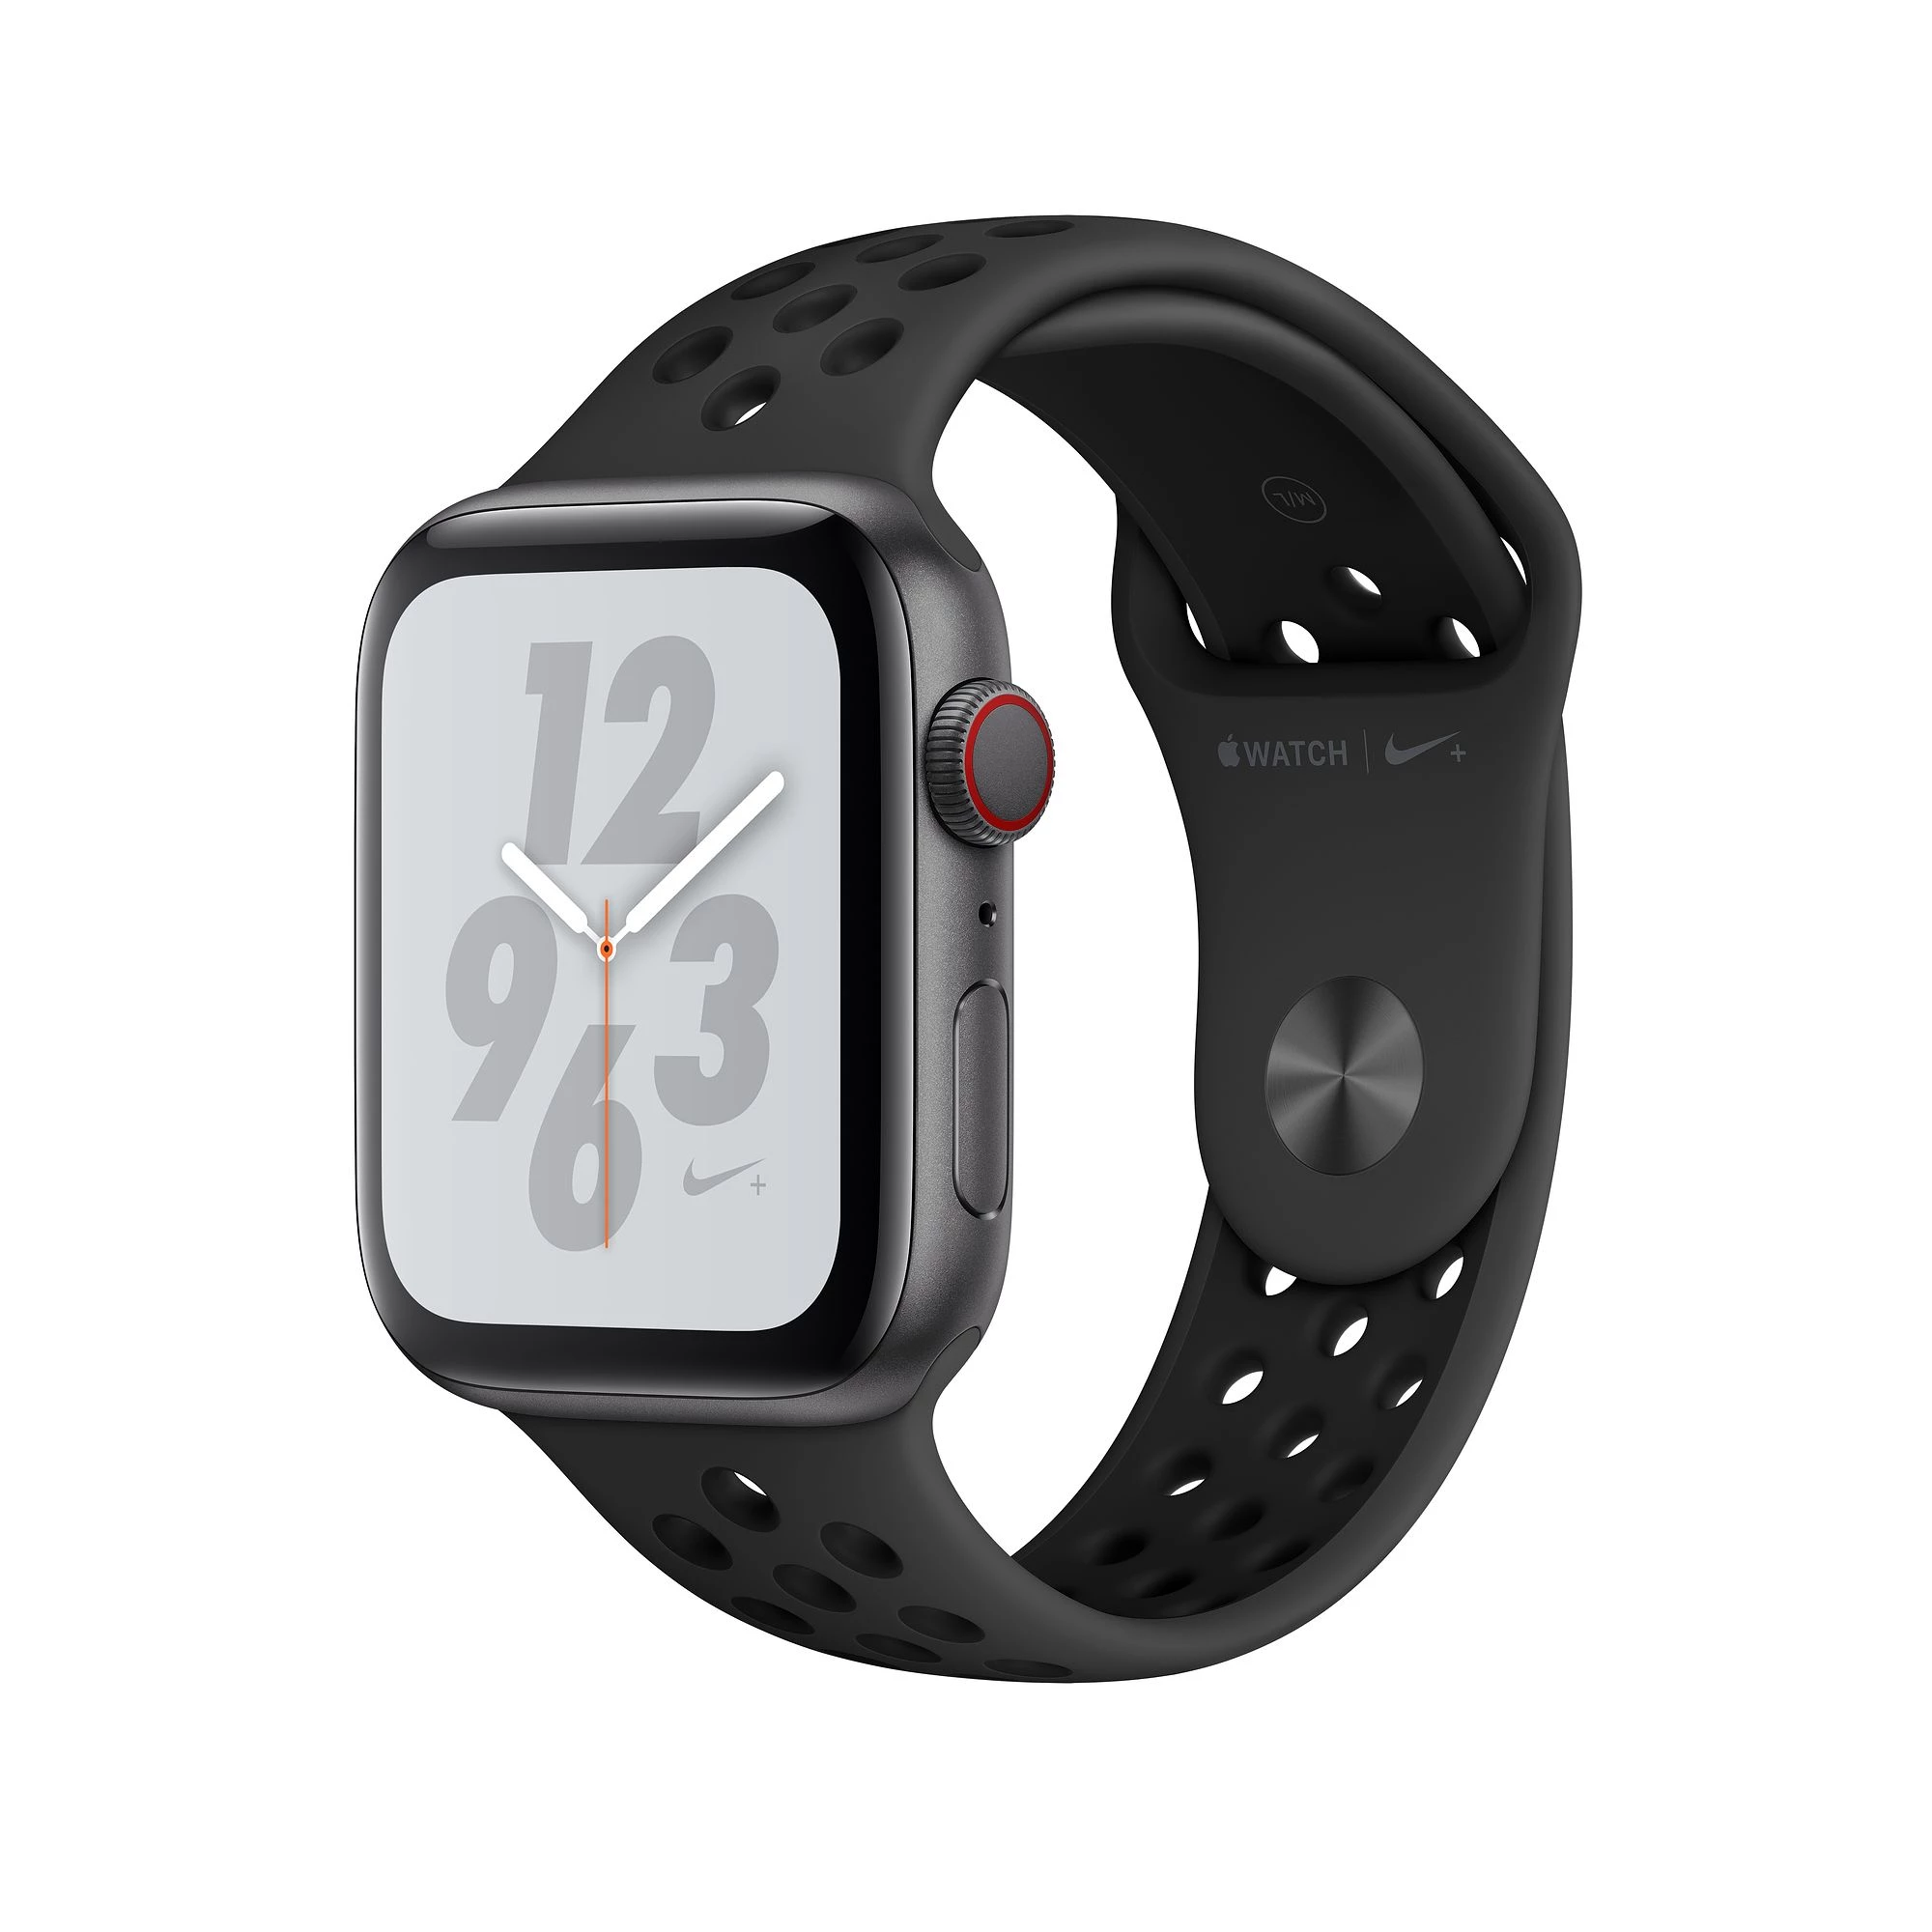 Apple Watch Series 4 Nike + (GPS + Cellular) 40mm Space Gray Aluminium Case with Anthracite / Black Nike Sport Band (MTX82, MTXG2)